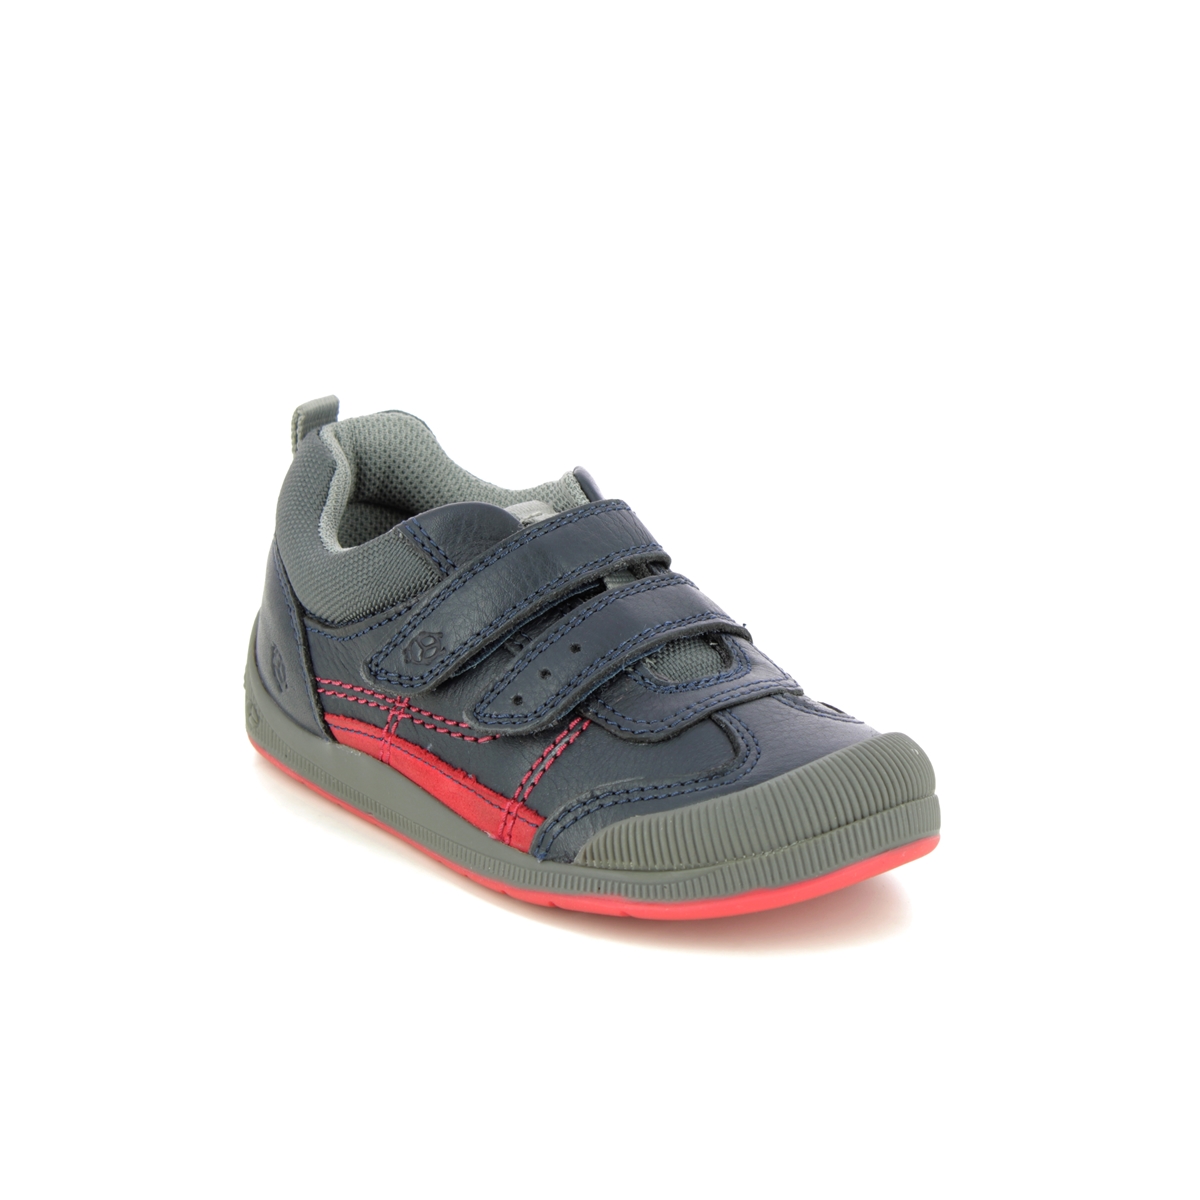 Start Rite Tickle Navy leather Kids Boys Toddler Shoes 1731-96F in a Plain Leather in Size 10.5